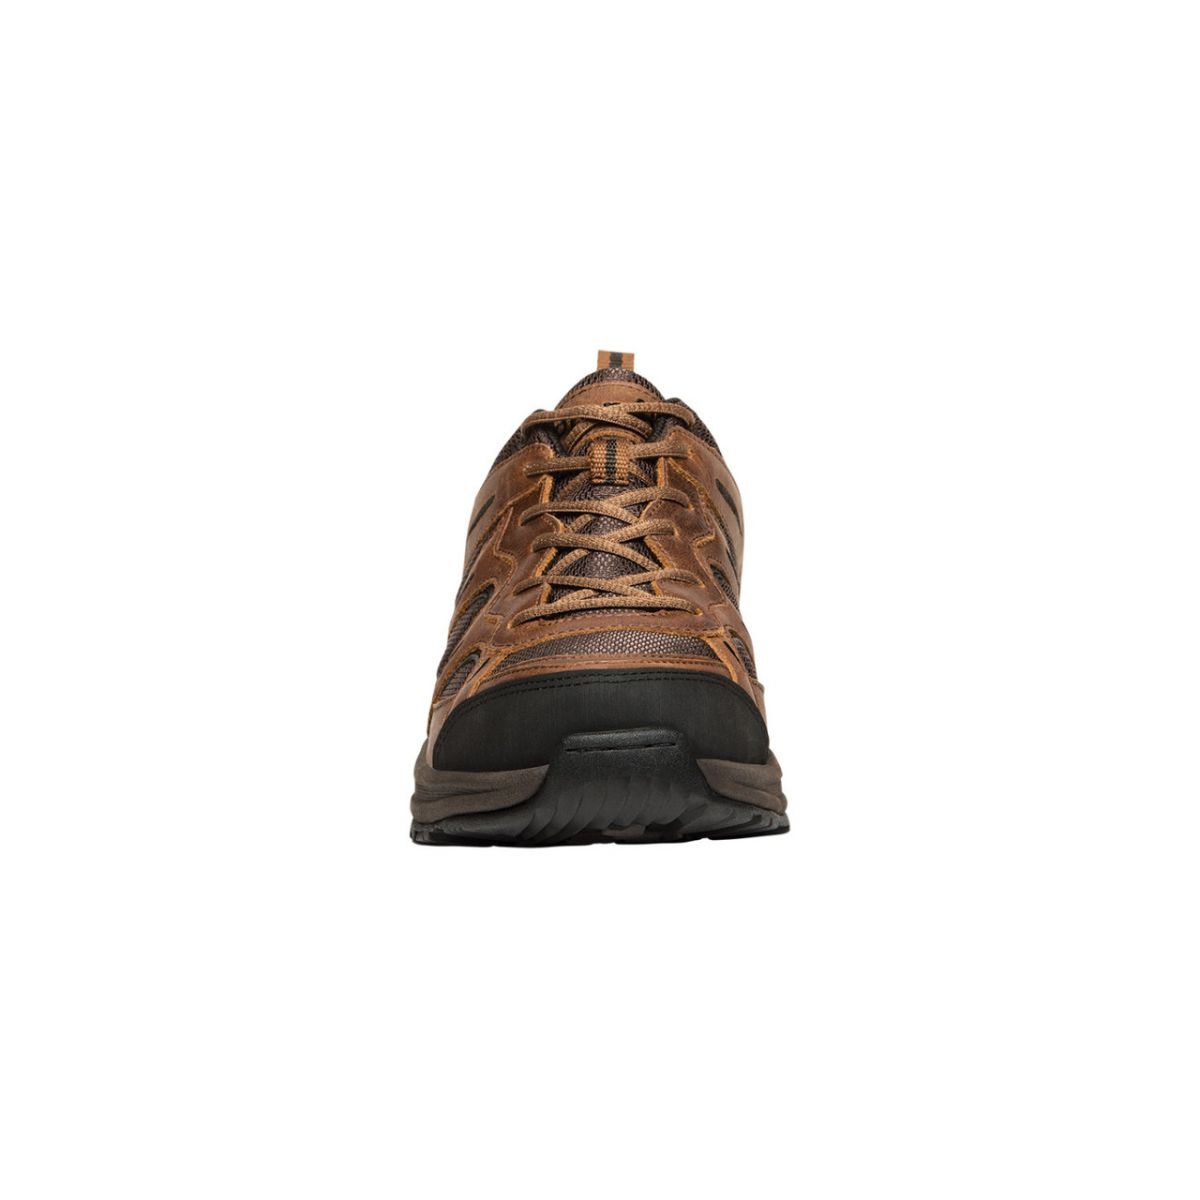 Propet Men's Connelly Hiking Shoe Brown - M5503BR BROWN - BROWN, 14-D